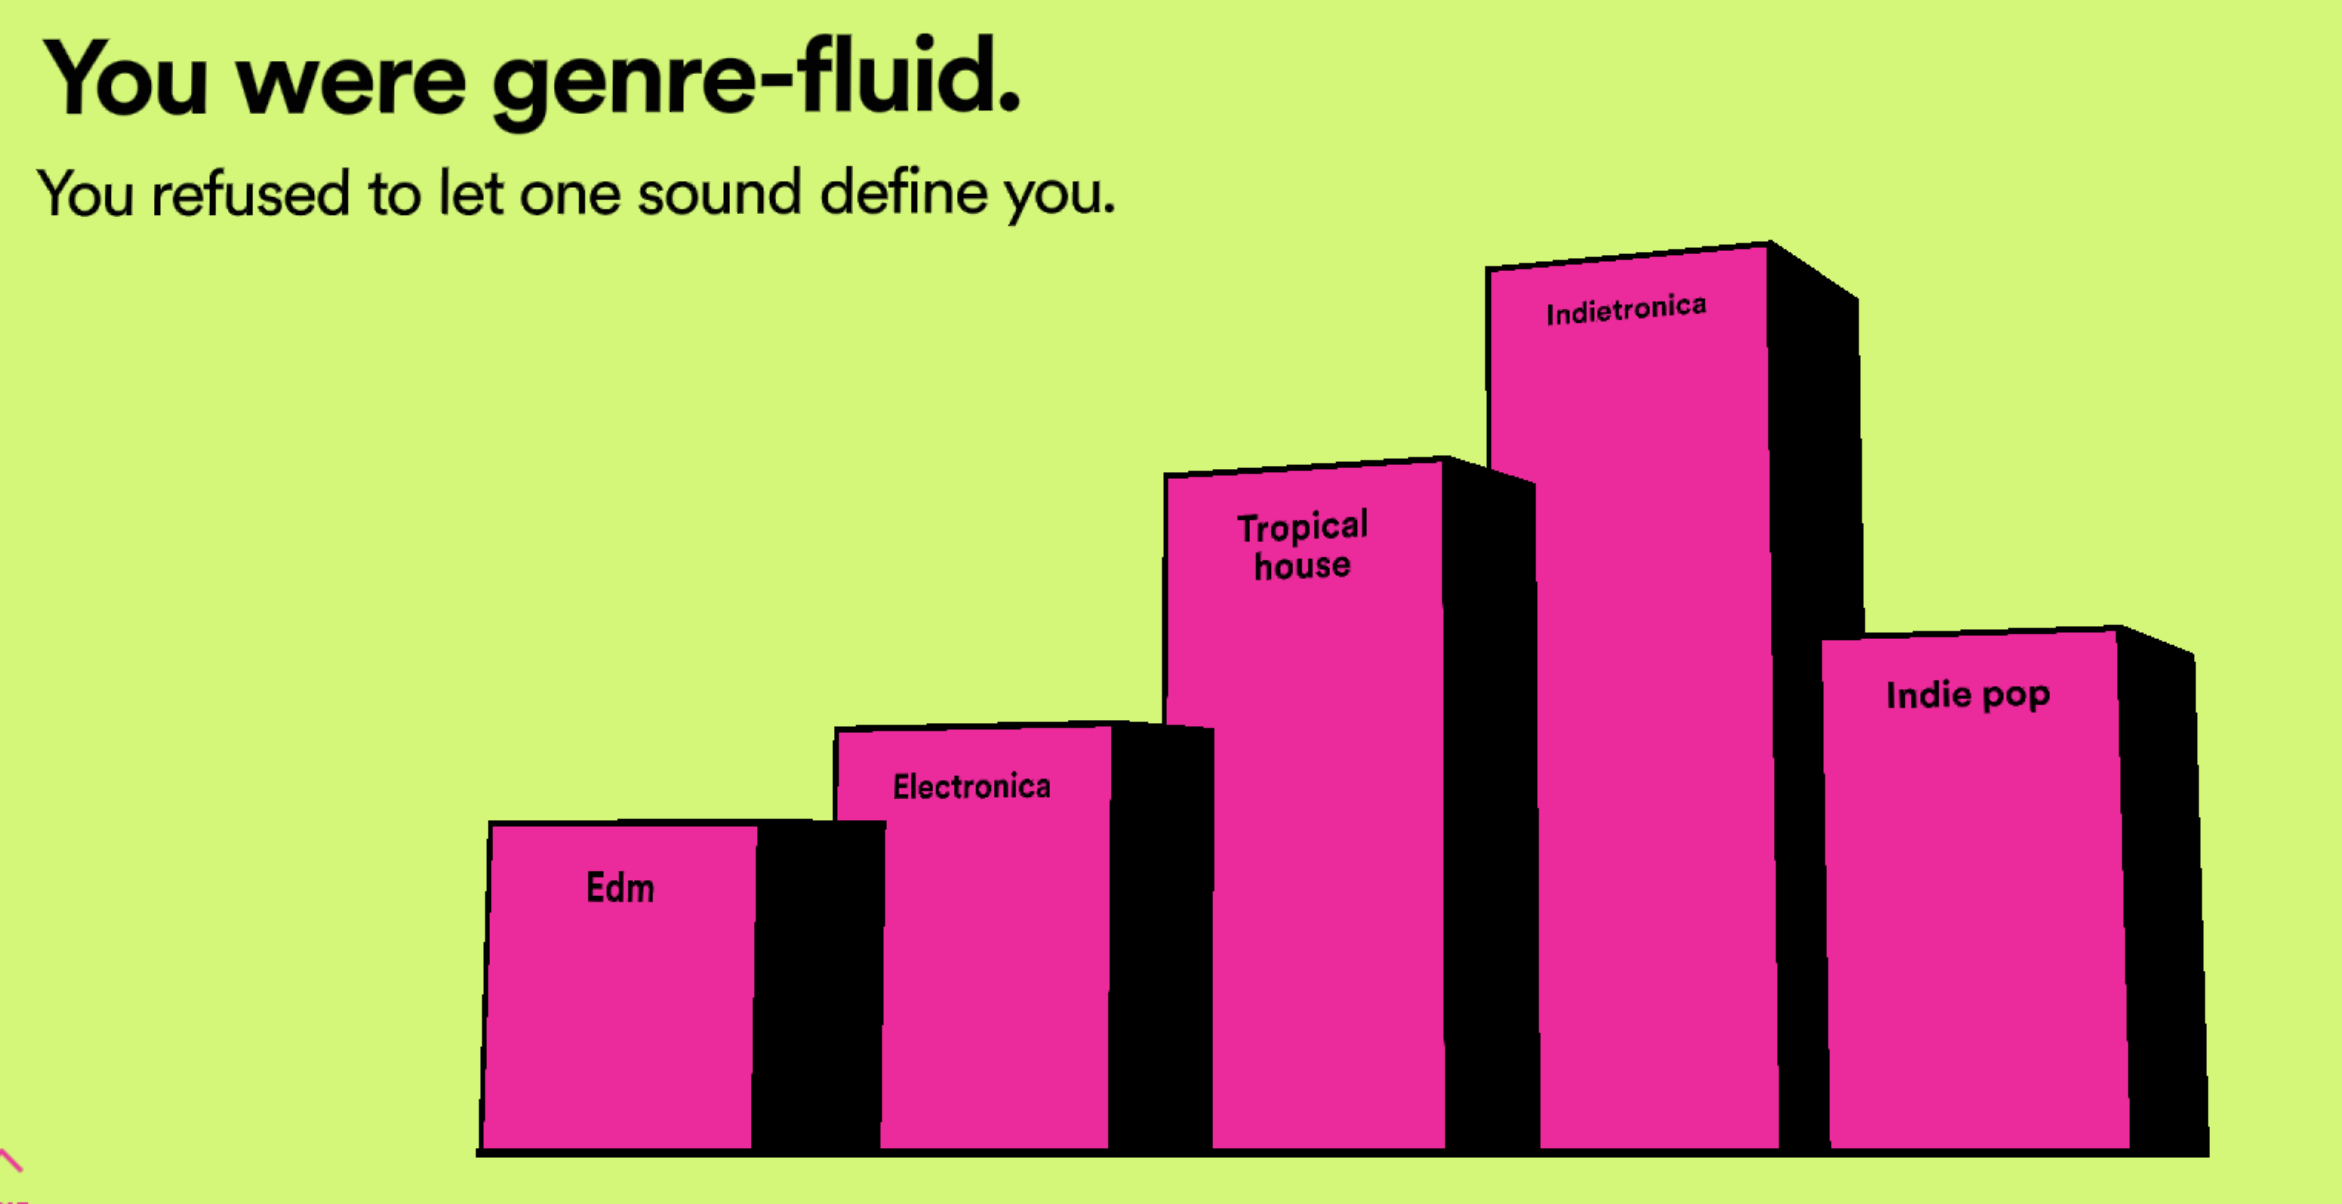 Screenshot of Spotify Wrapped campaign showing “You were genre-fluid”